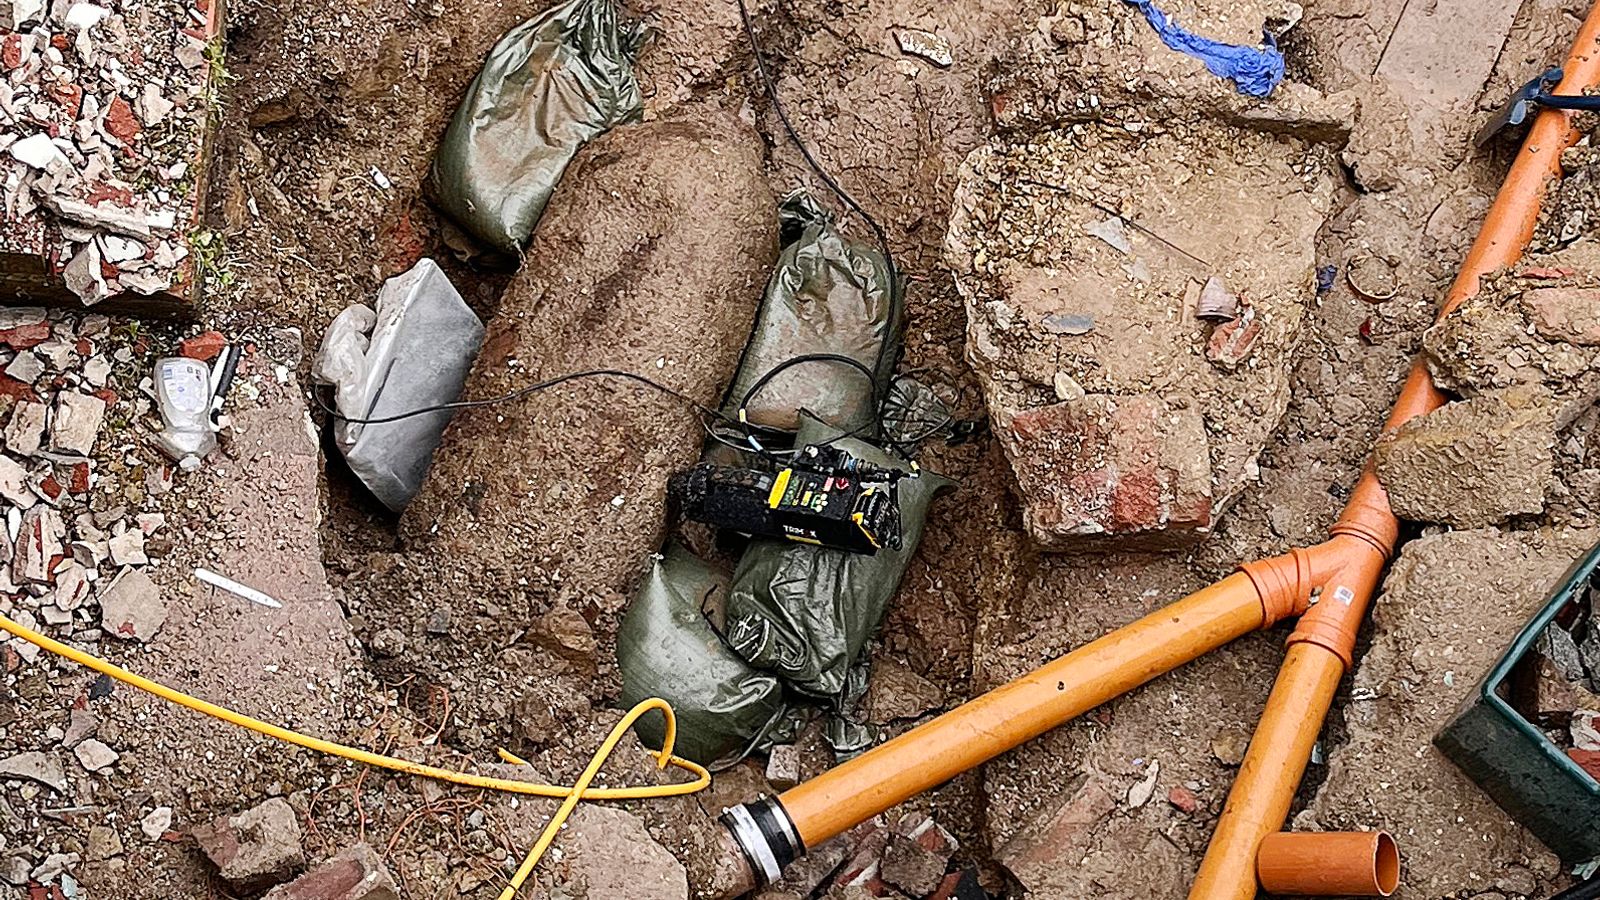 Unexploded WW2 bomb in Plymouth to be removed by military convoy for disposal at sea, leading to evacuation of residents within 300 metres of the convoy route